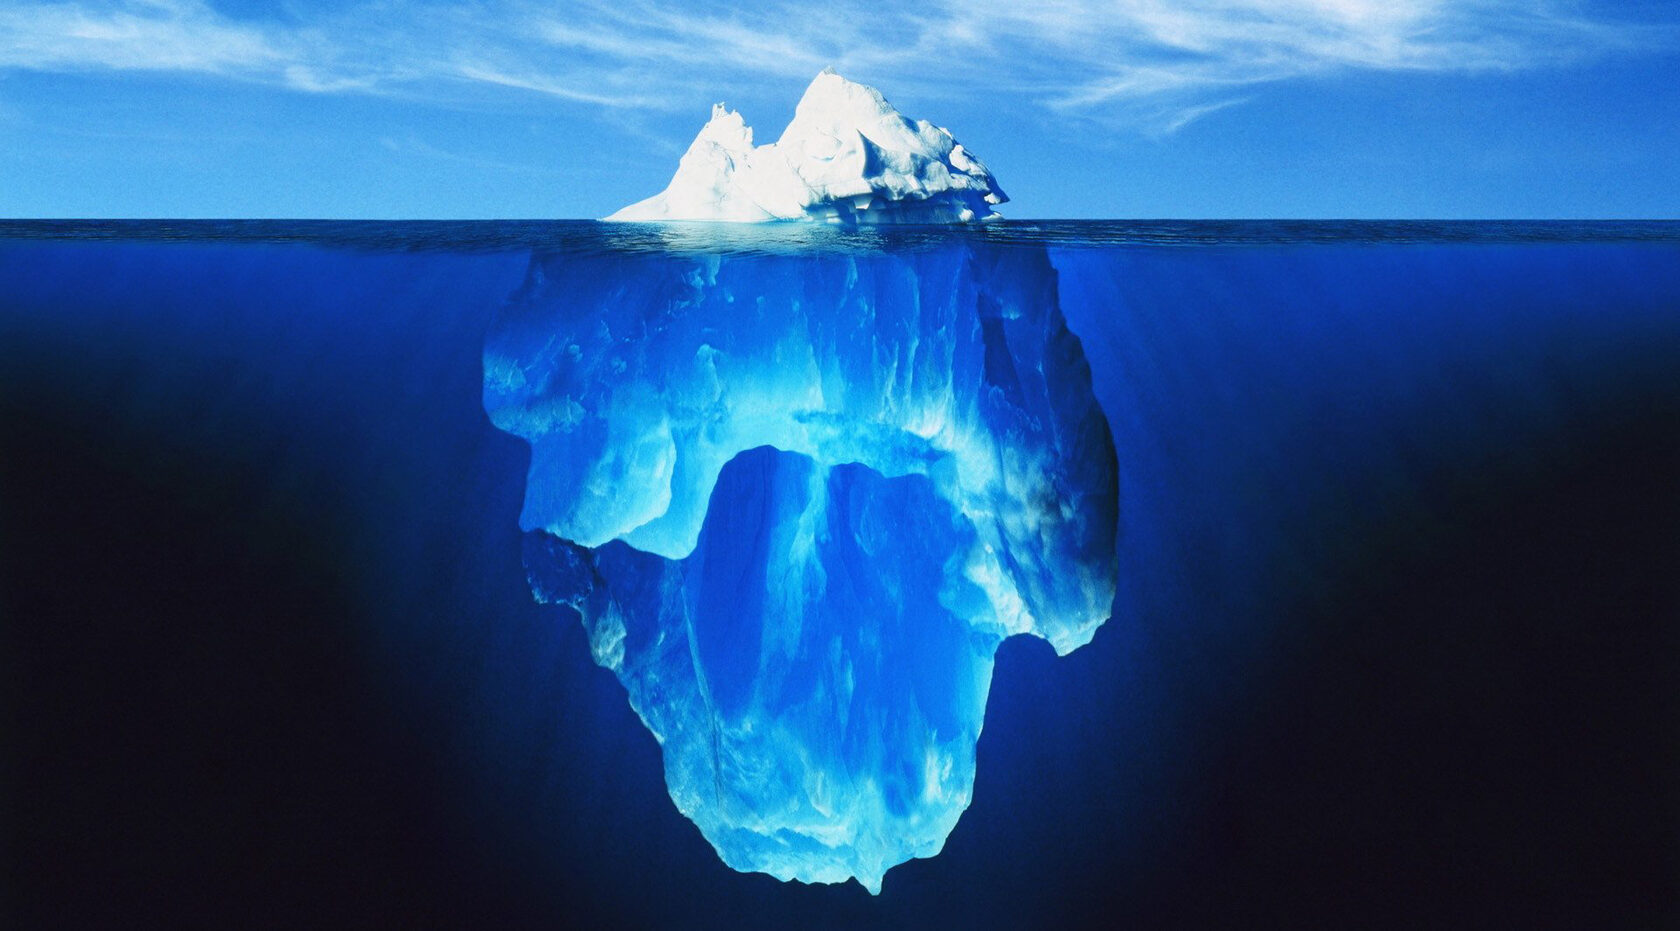 Illustration of iceberg above and under water